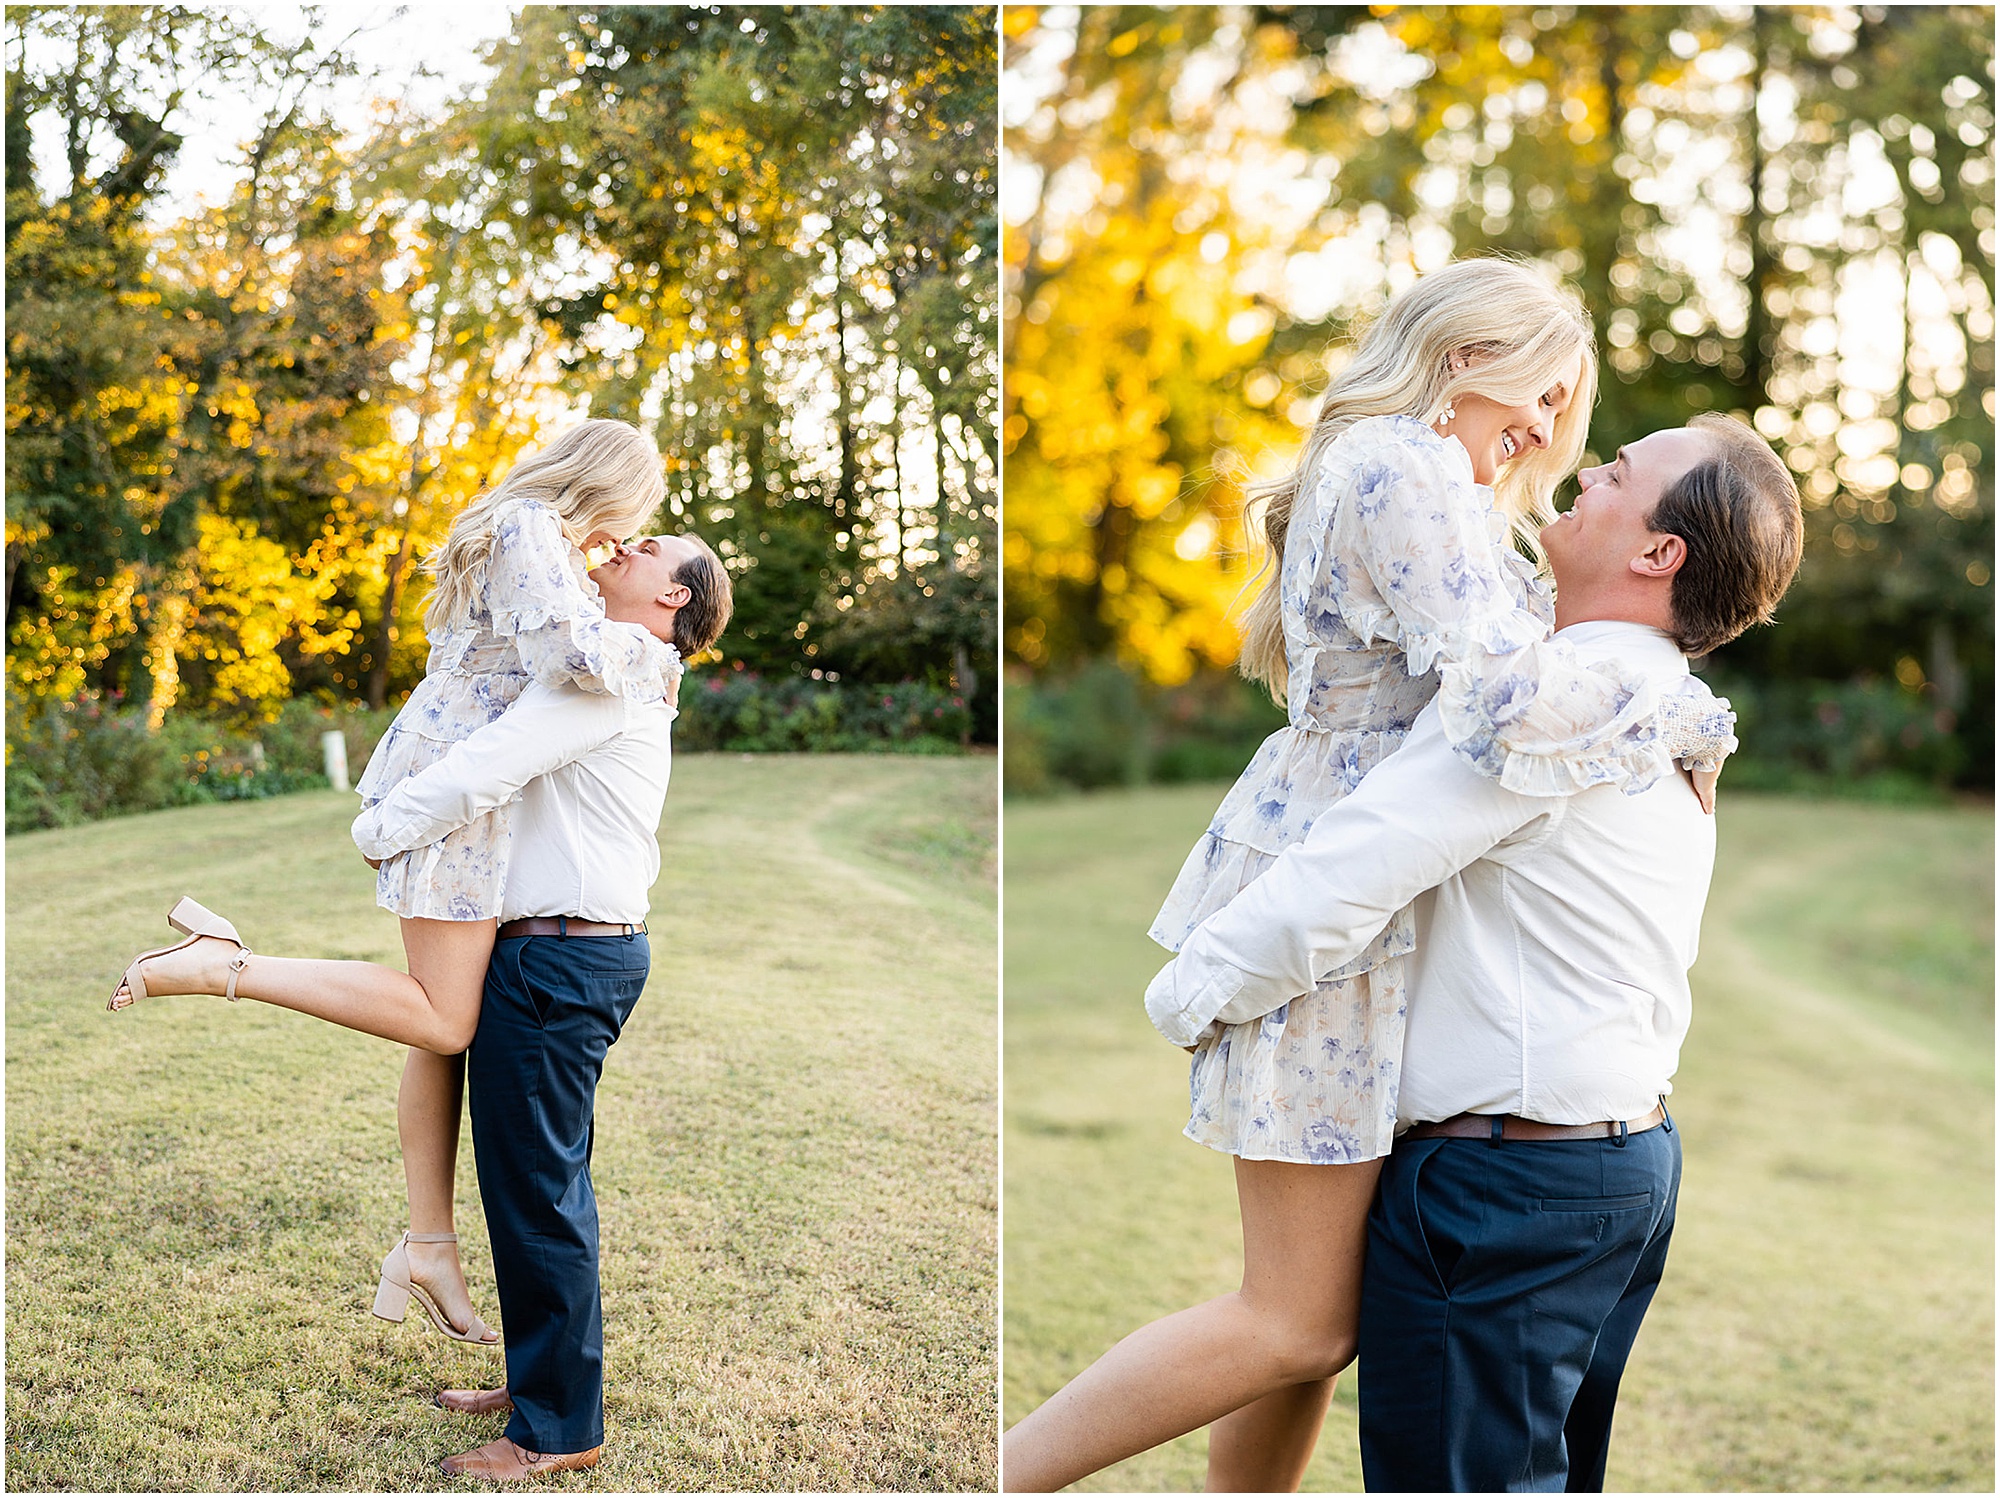 Eleanor Stenner Photography - a Birmingham, Alabama Wedding Photographer - photographed the future Abbi and Dylan Shadinger in Birmingham, Alabama